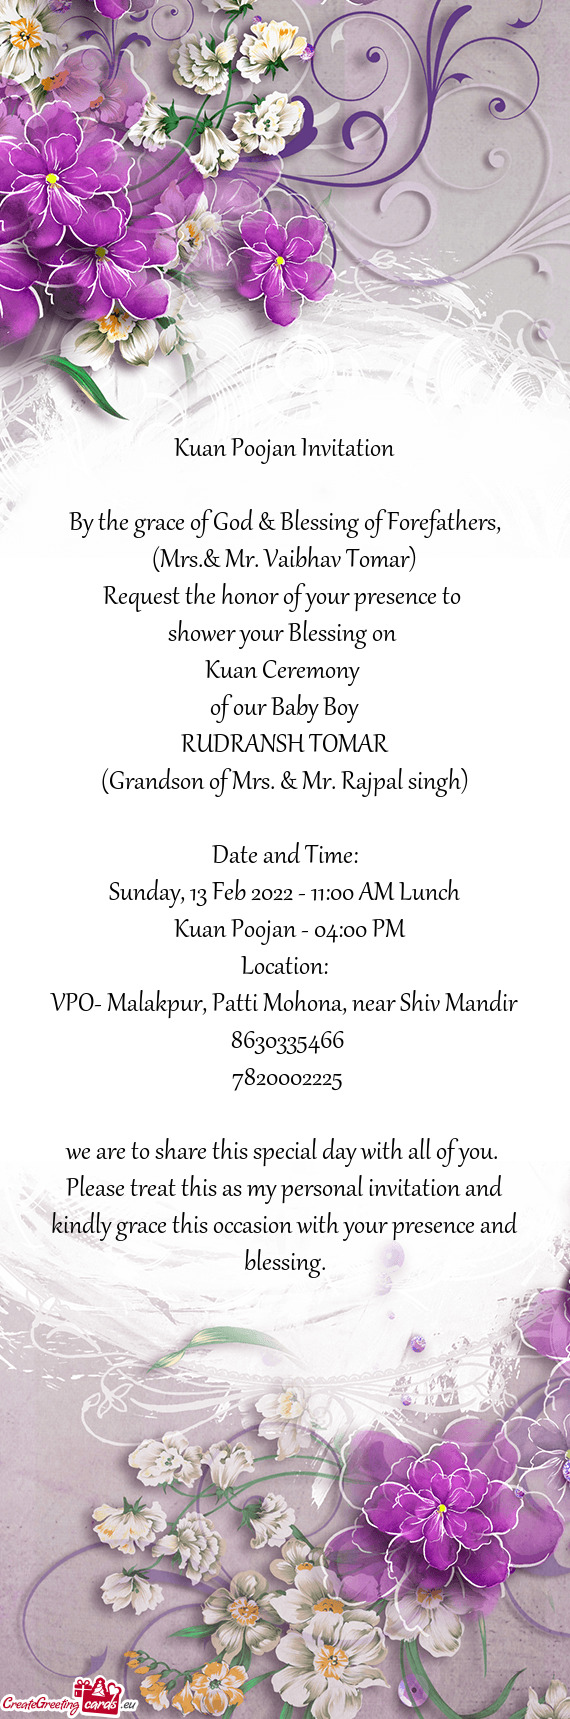 Kuan Poojan Invitation
 
 By the grace of God & Blessing of Forefathers